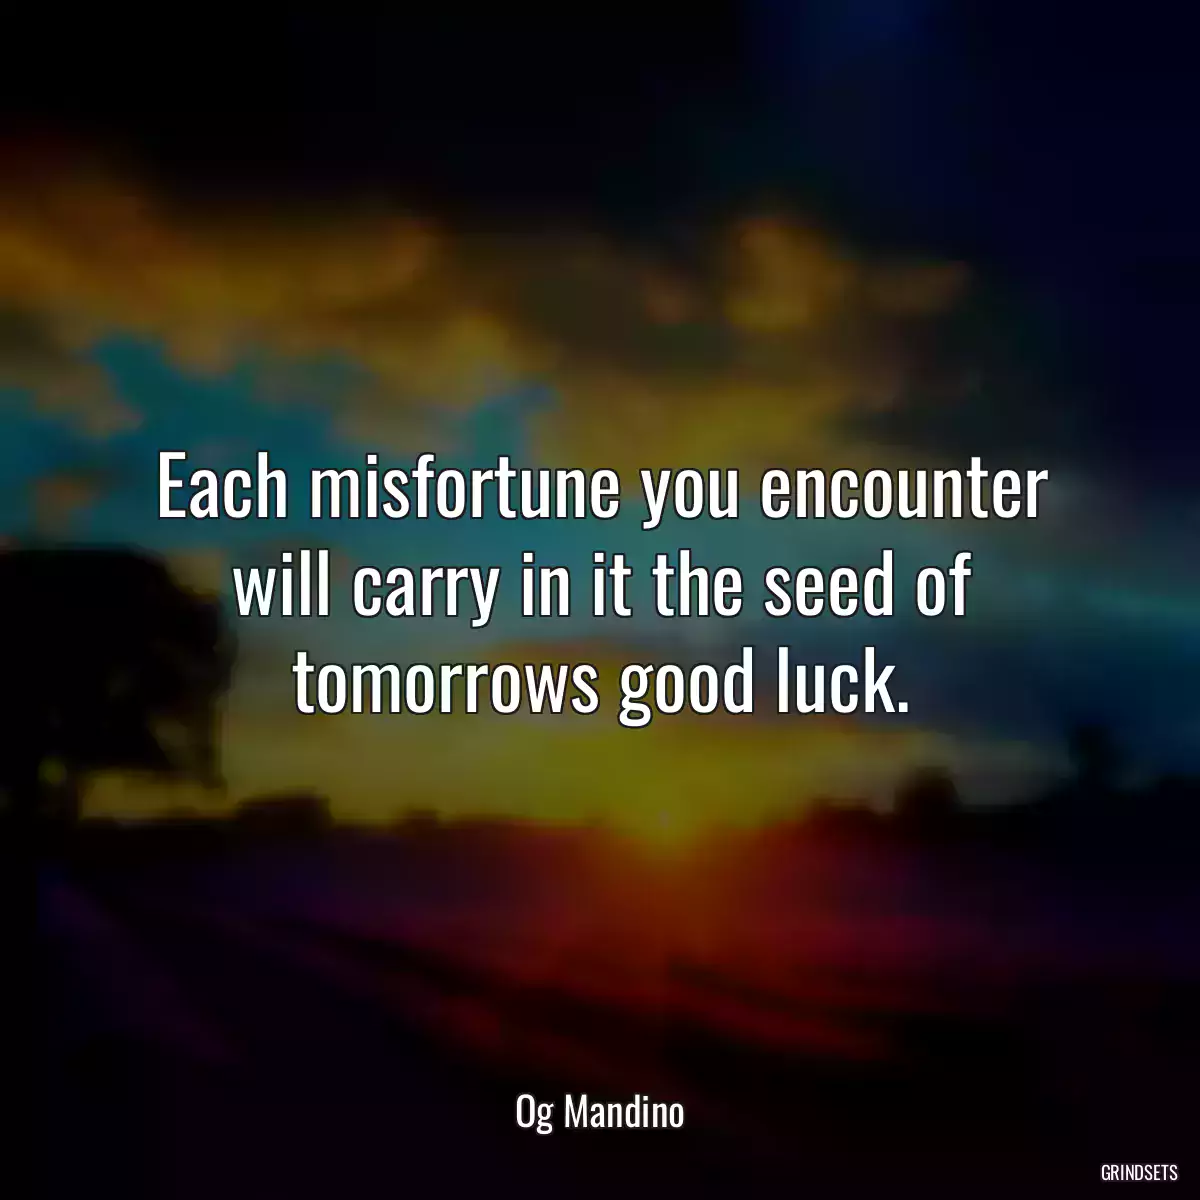 Each misfortune you encounter will carry in it the seed of tomorrows good luck.